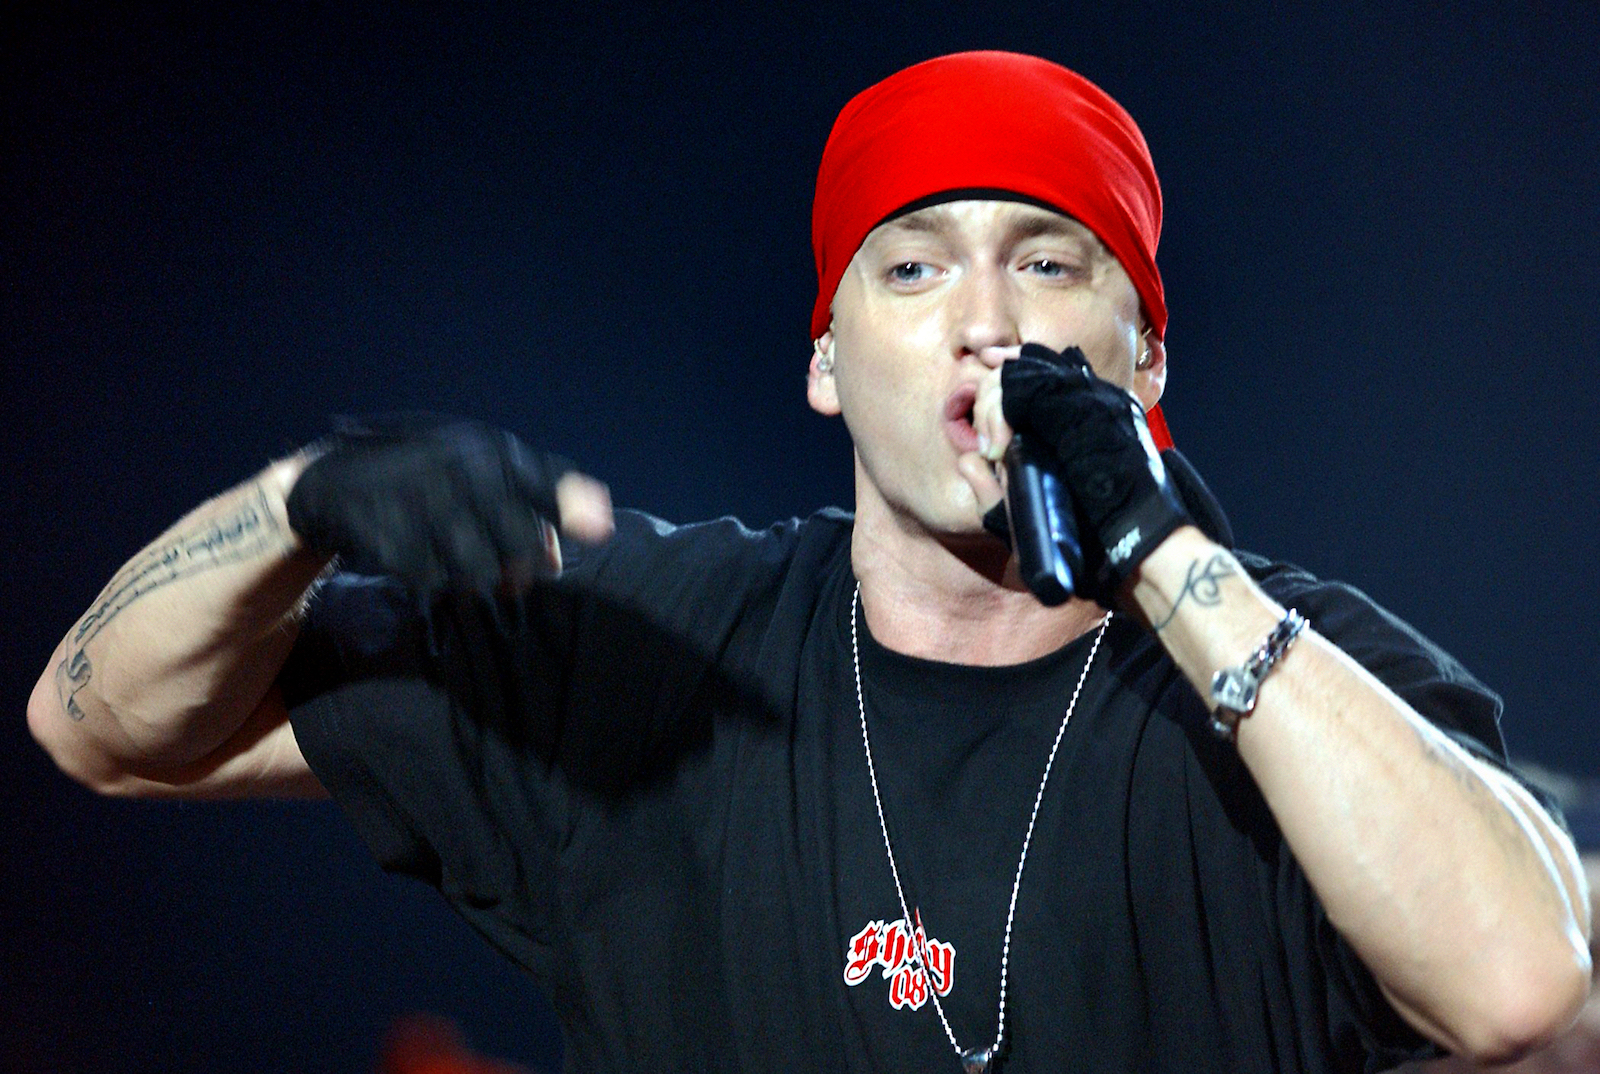 Eminem, wearing a red beanie and black T-shirt, counts LL Cool J among his early influences